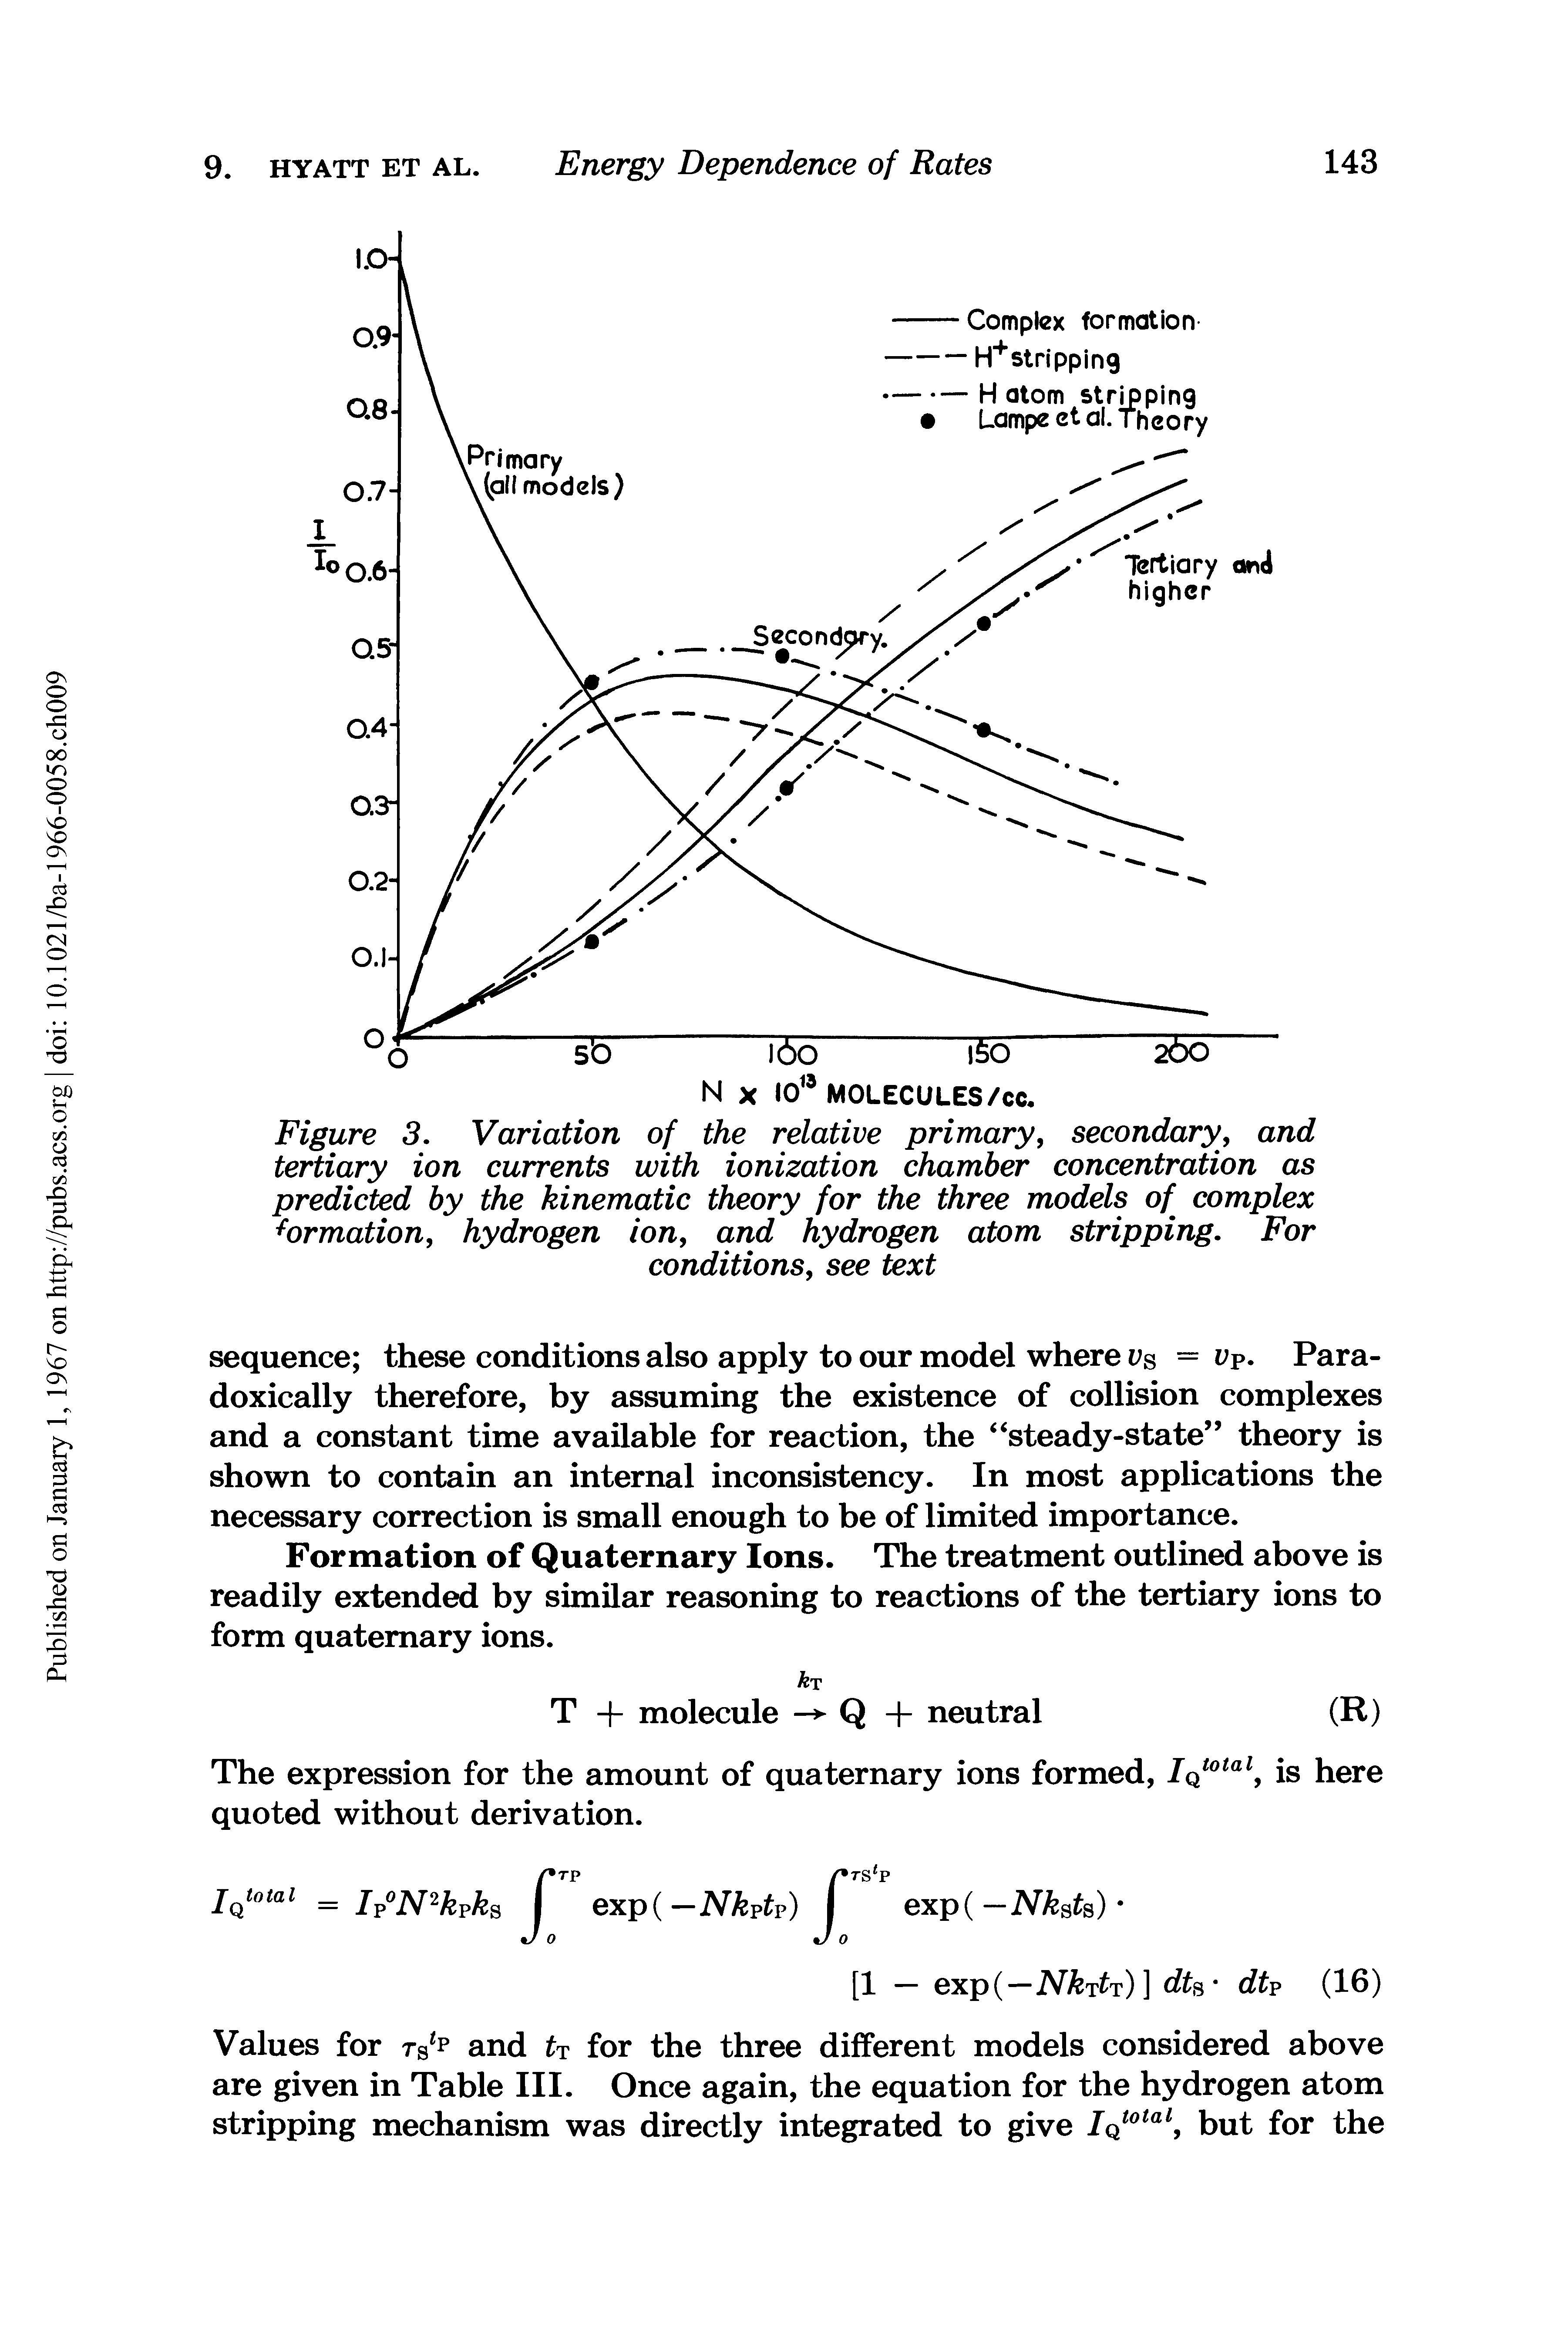 Figure 3. Variation of the relative primary, secondary, and tertiary ion currents with ionization chamber concentration as predicted by the kinematic theory for the three models of complex formation, hydrogen ion, and hydrogen atom stripping. For conditions, see text...